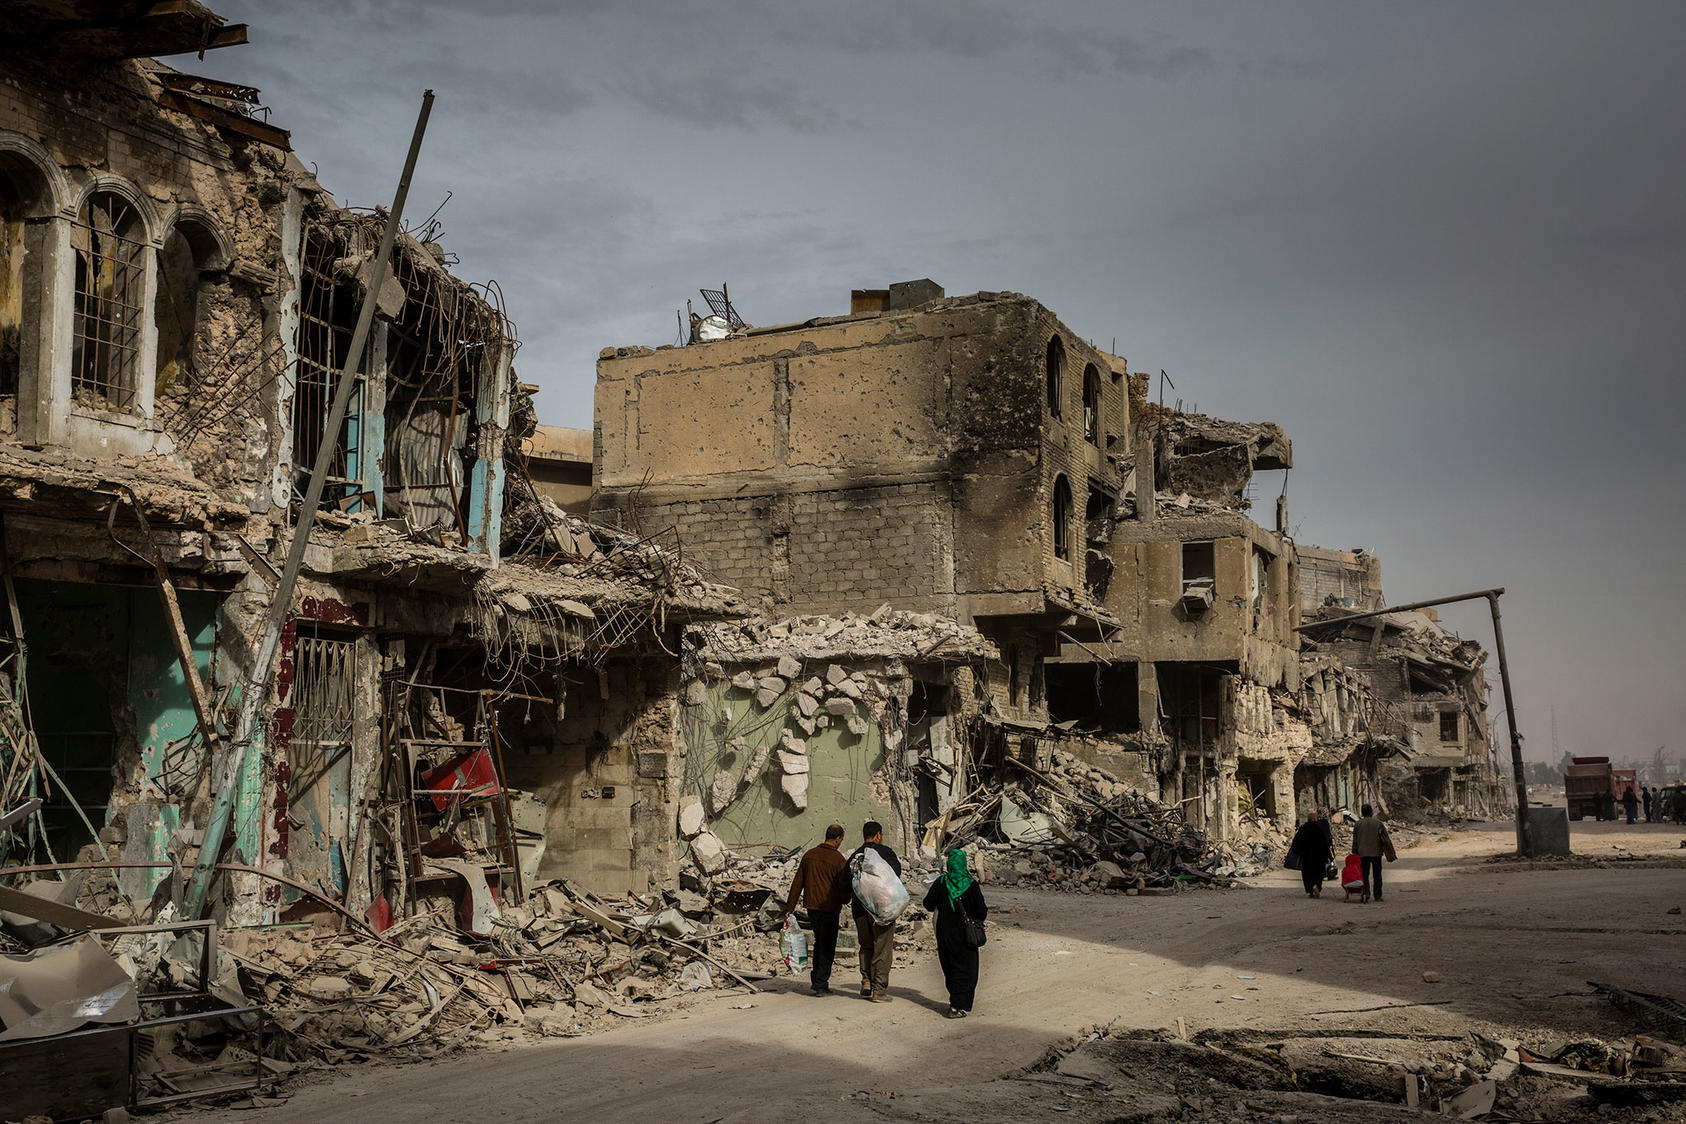 Iraqis return to their destroyed homes in the Old City of Mosul, in December 2017.